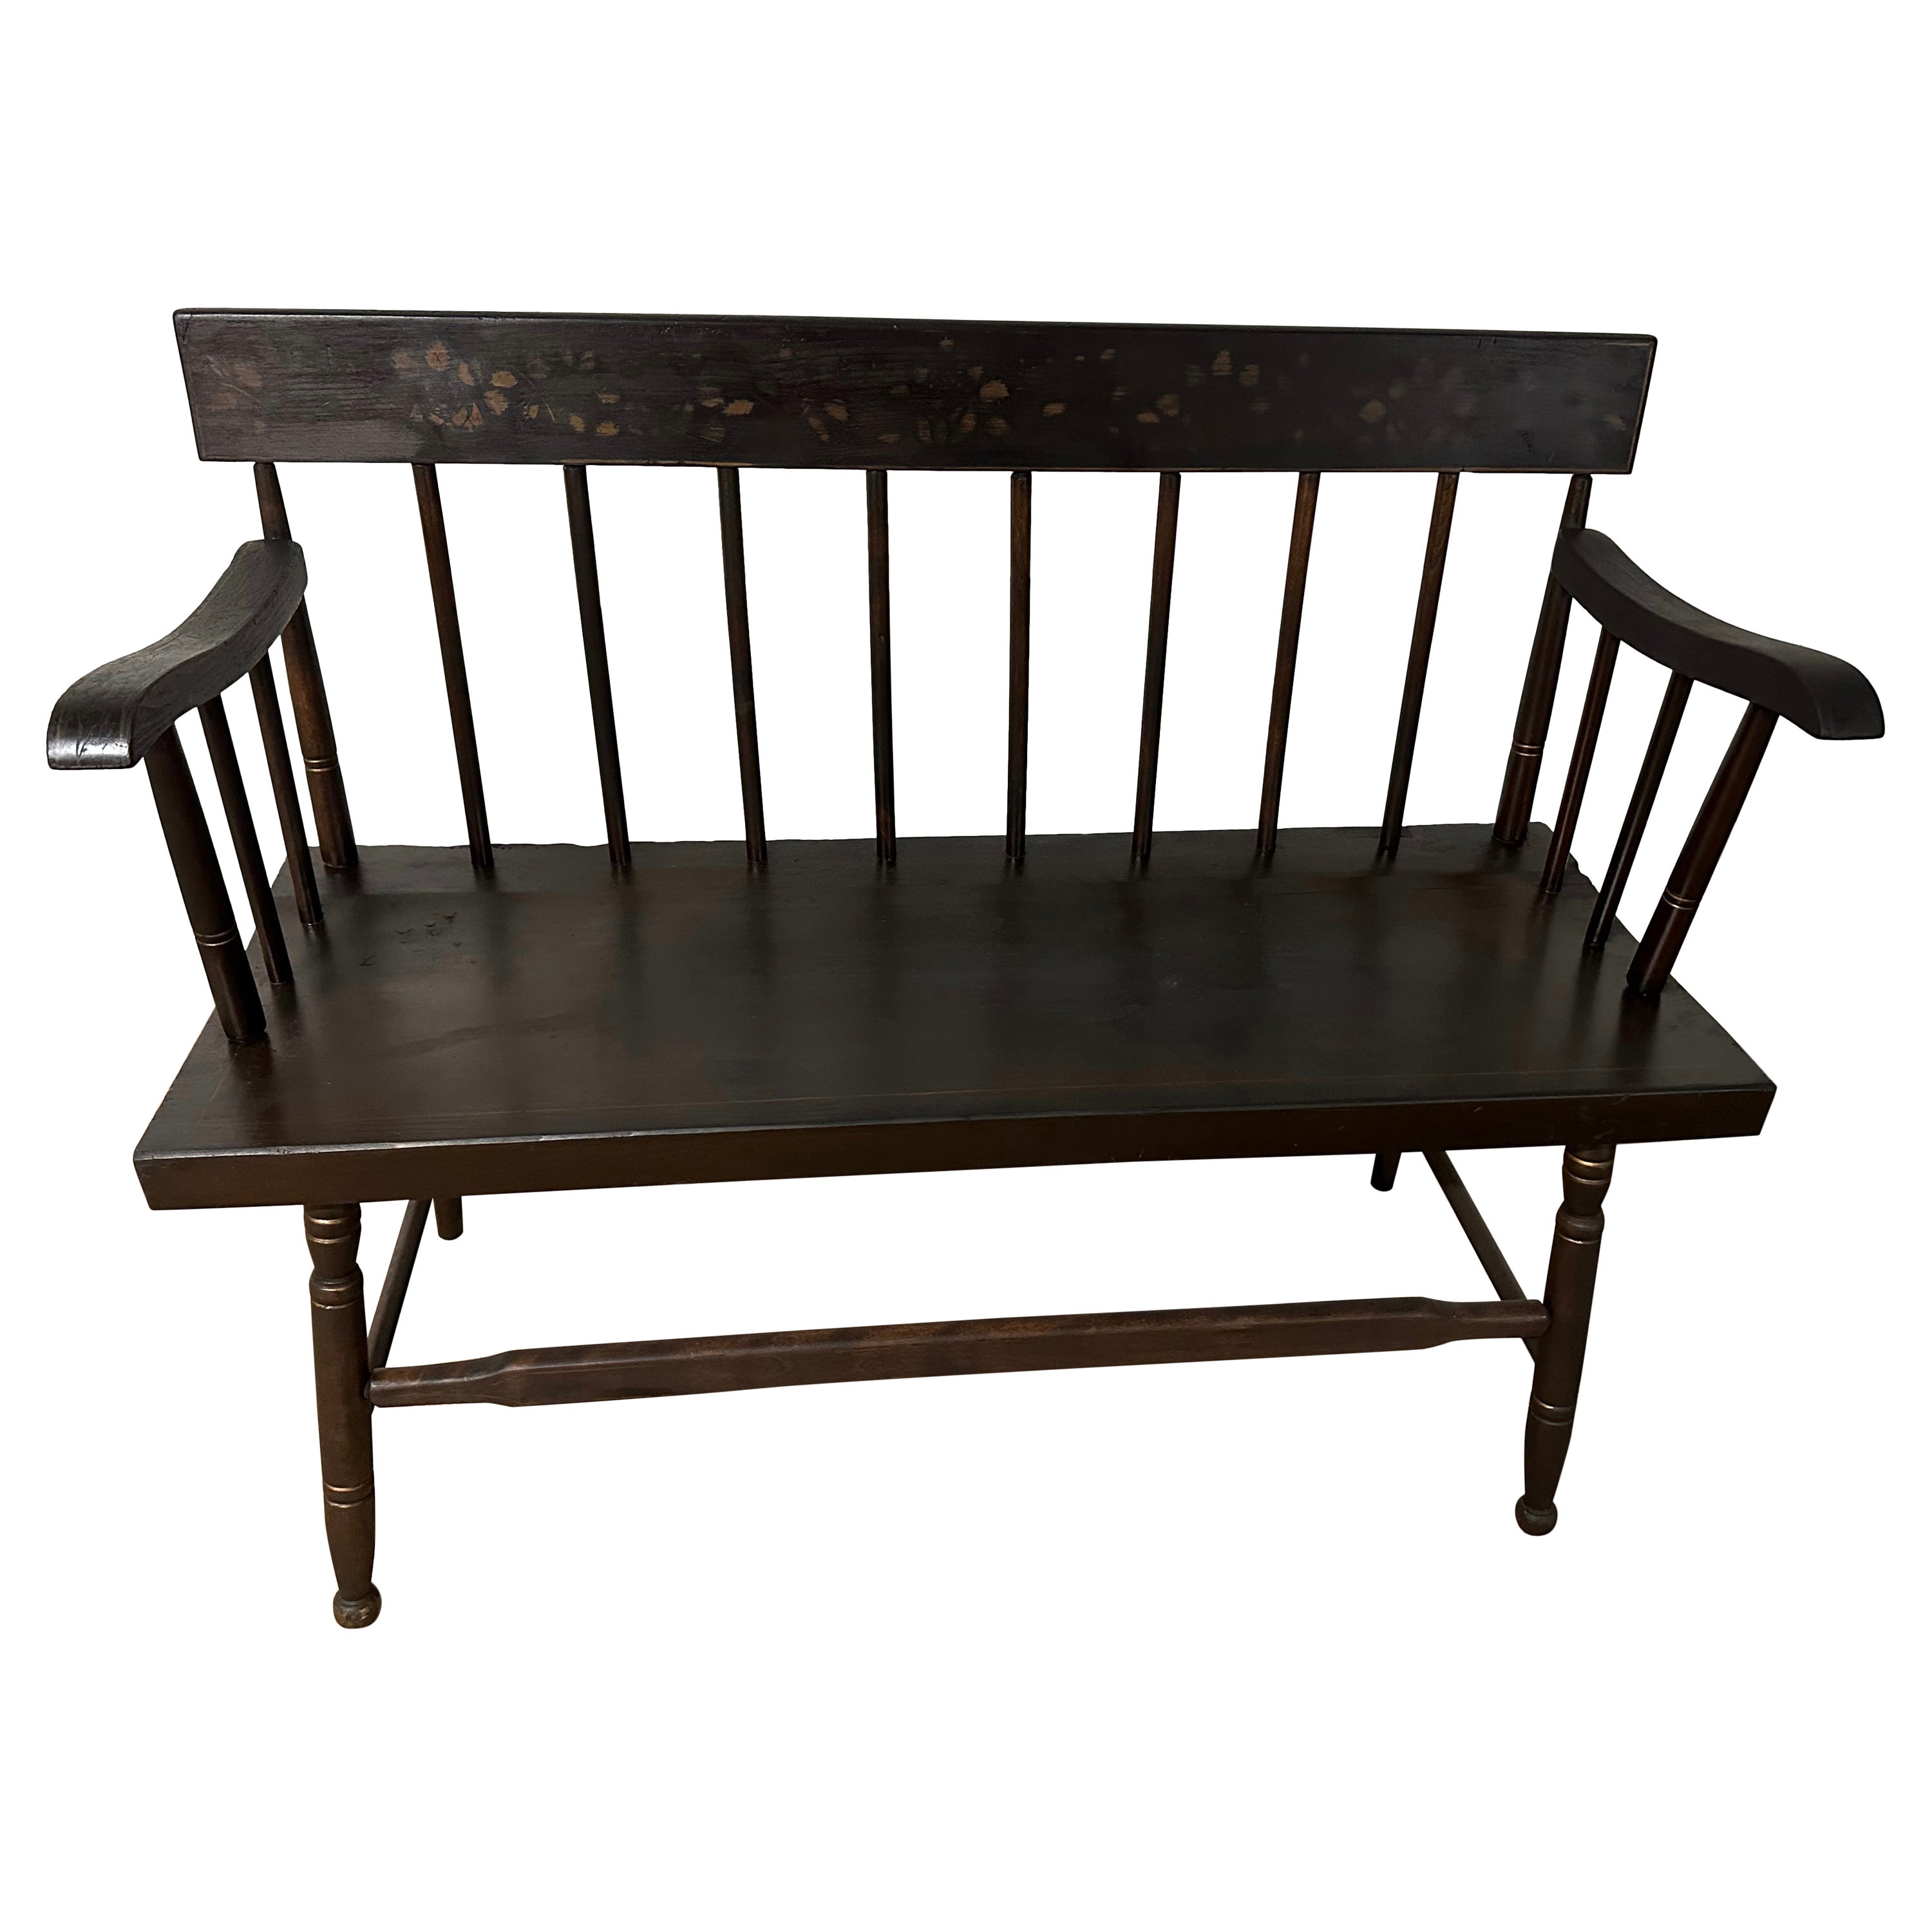 Vintage Hitchcock Style Settee Bench For Sale